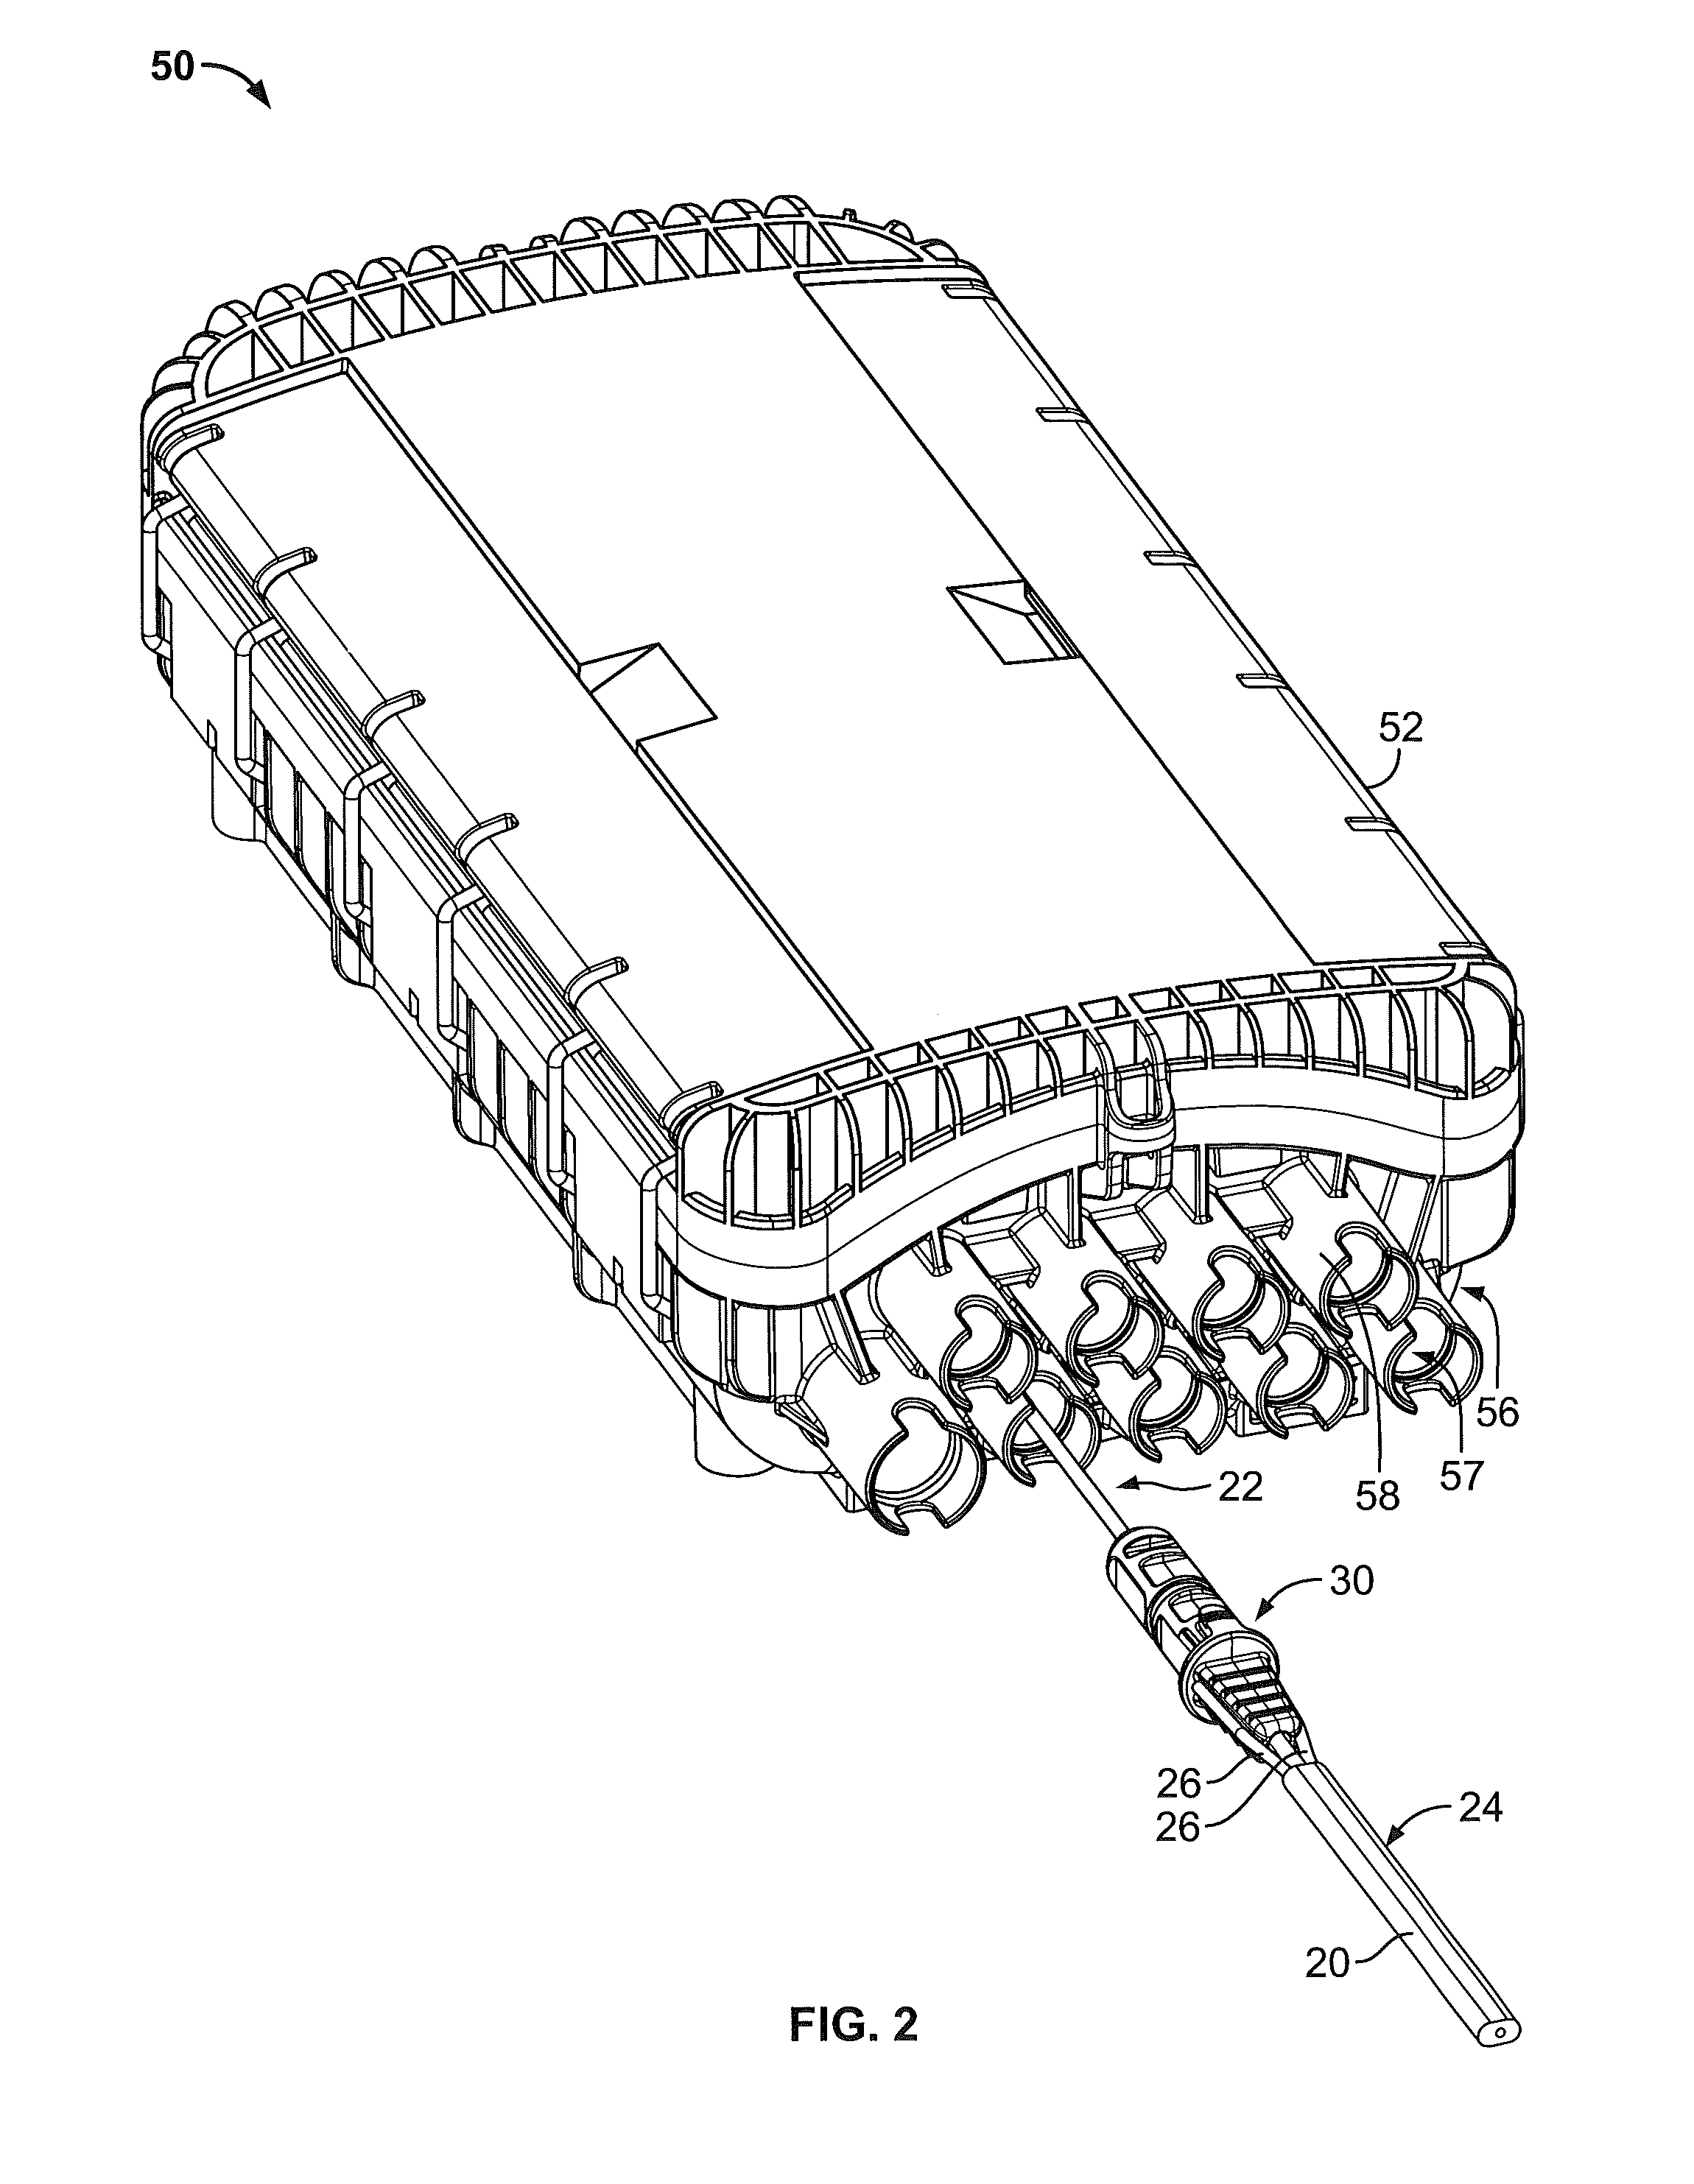 Cable enclosure systems, plugs and methods for using the same